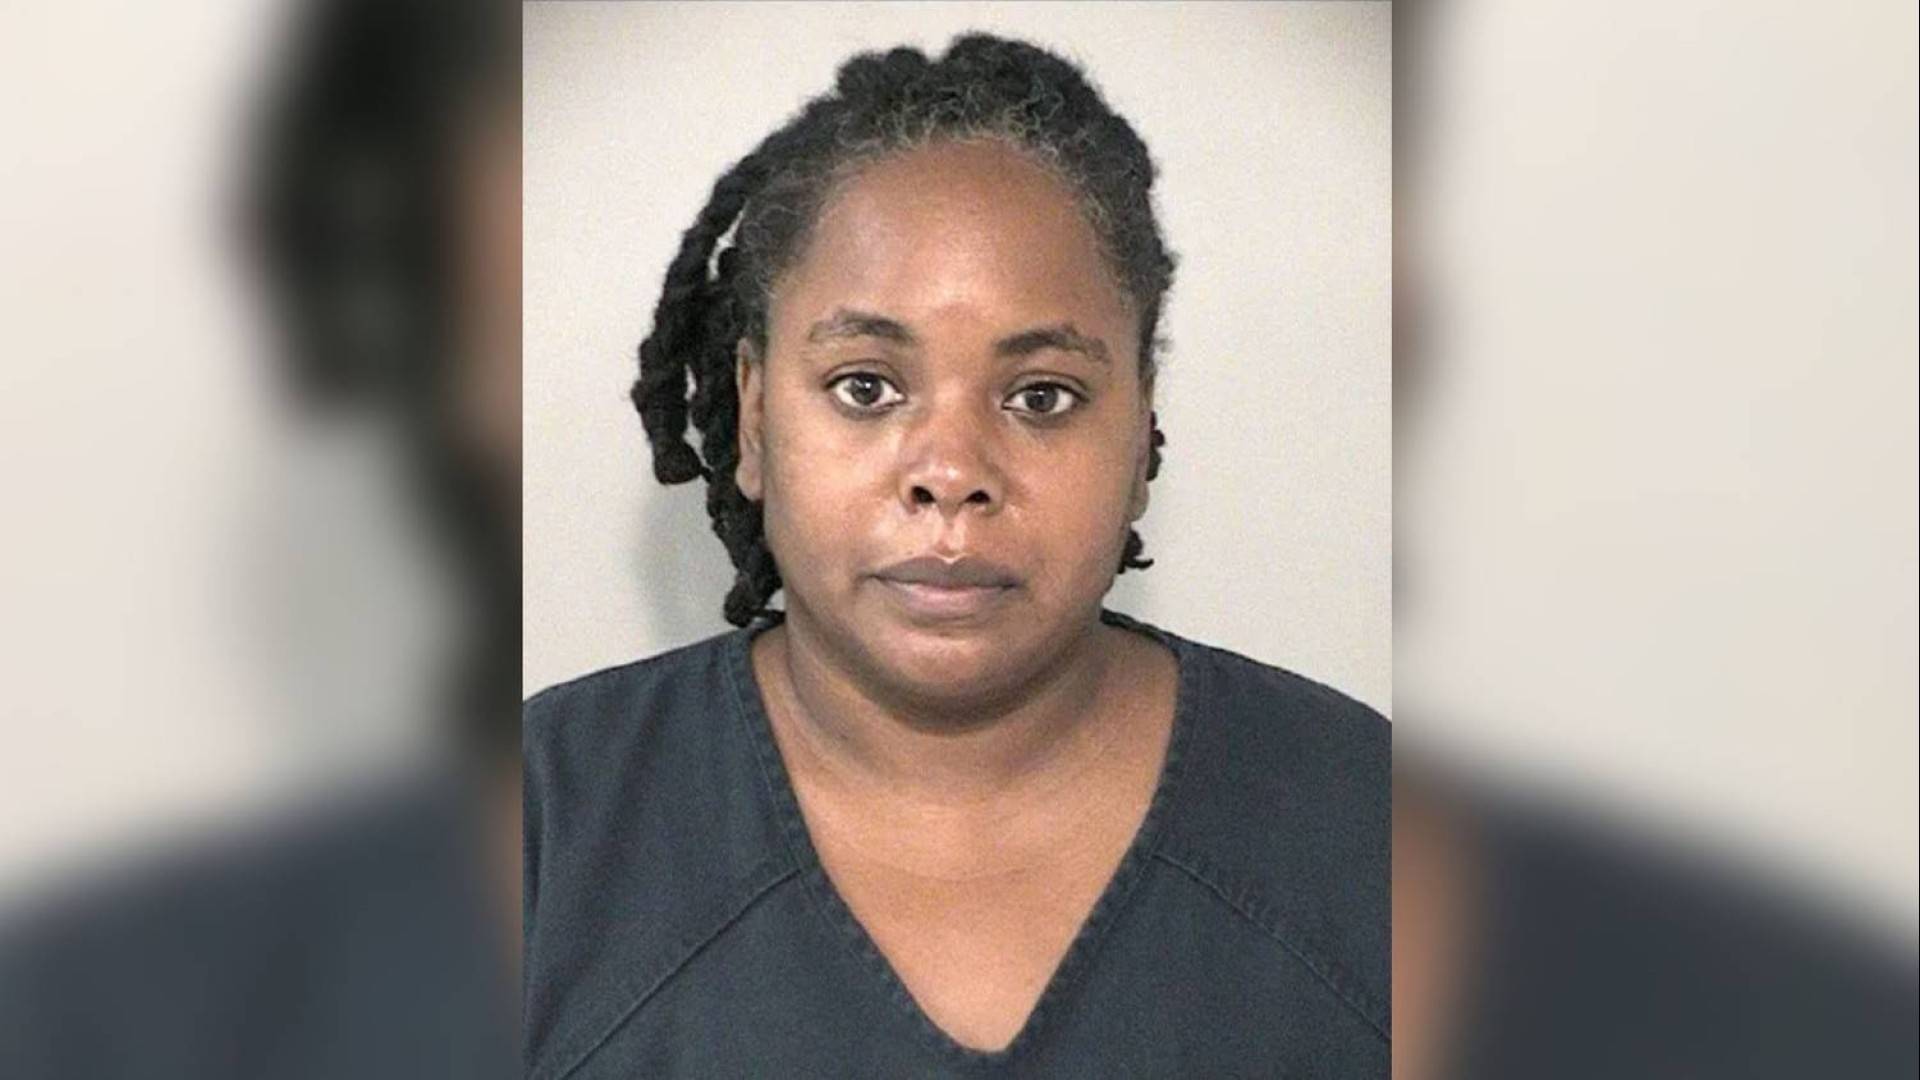 Texas Mother Sentenced To Prison For Allowing 13 Year Old Daughter To Marry A 47 Year Old Man